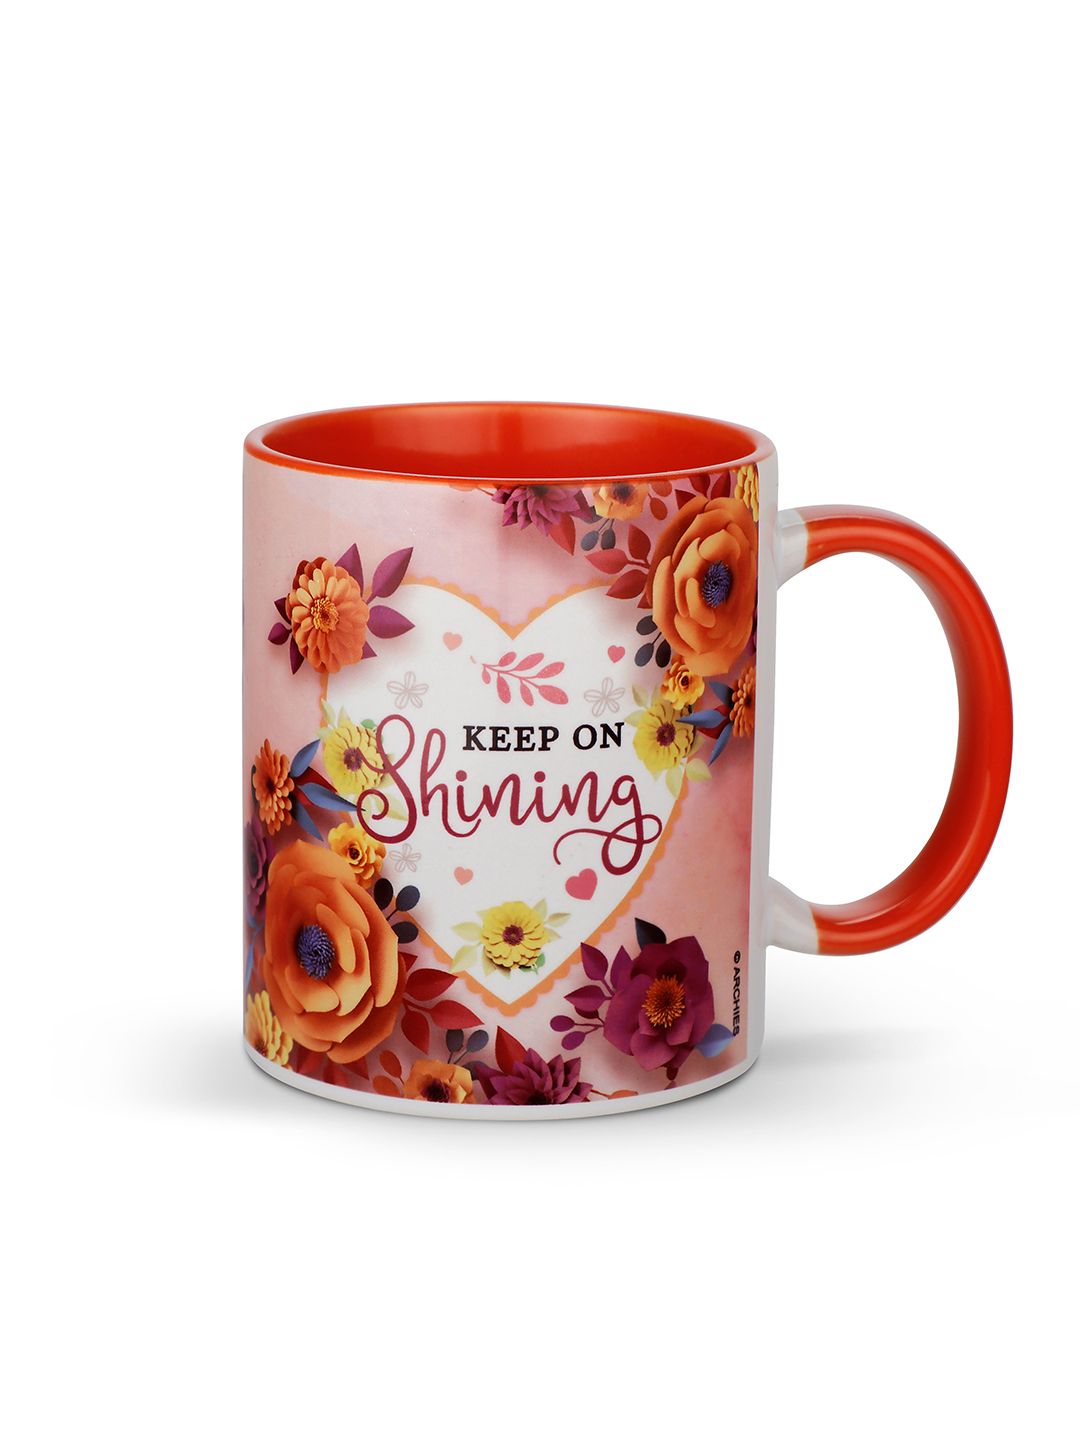 Archies Red & Yellow Printed Ceramic Glossy Mug and Bowl Set of Cups and Mugs Price in India